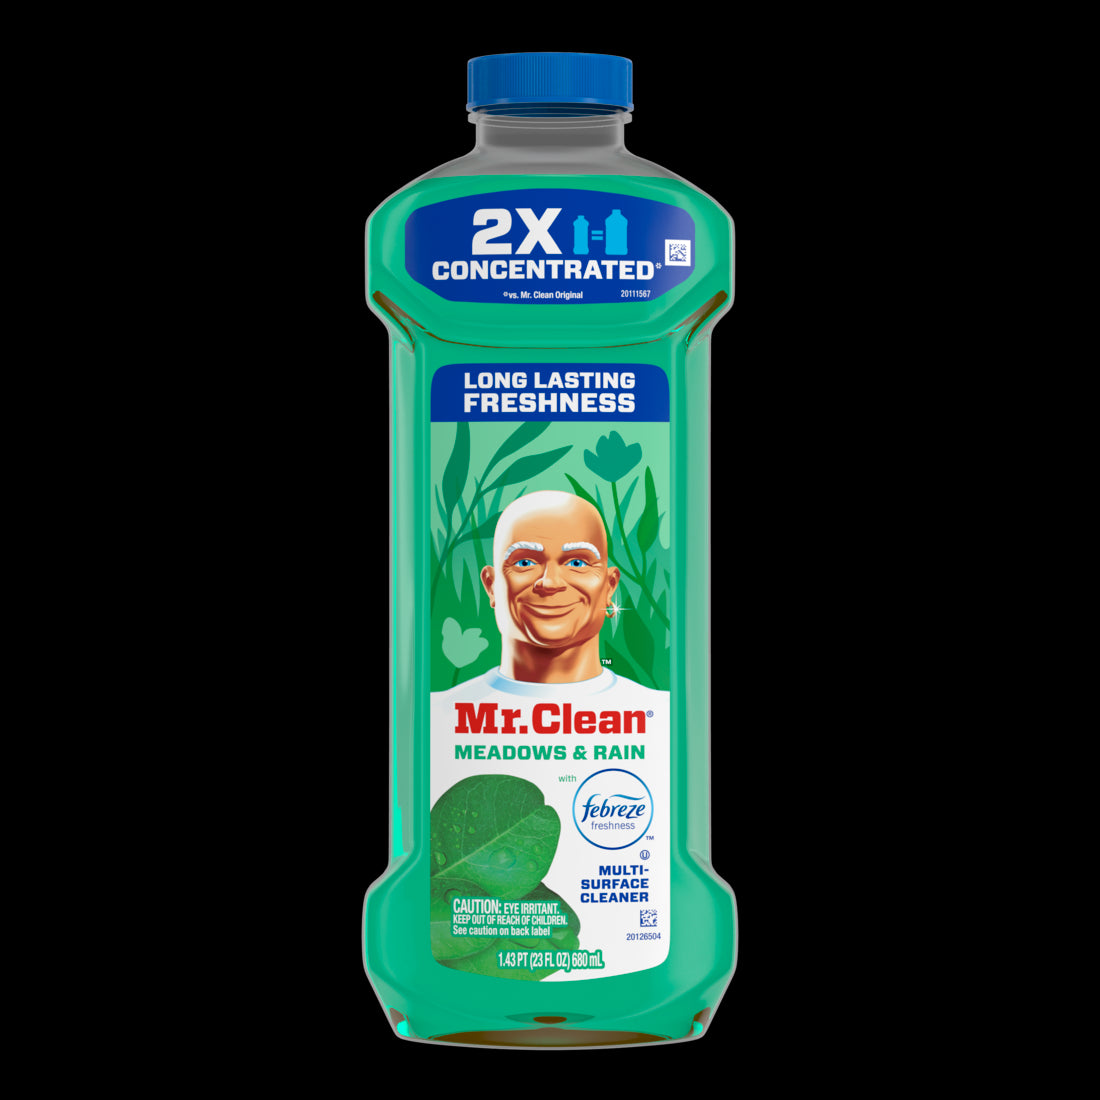 Mr. Clean 2X Concentrated Multi Surface Cleaner with Febreze Meadows & Rain Scent-23oz/9pk